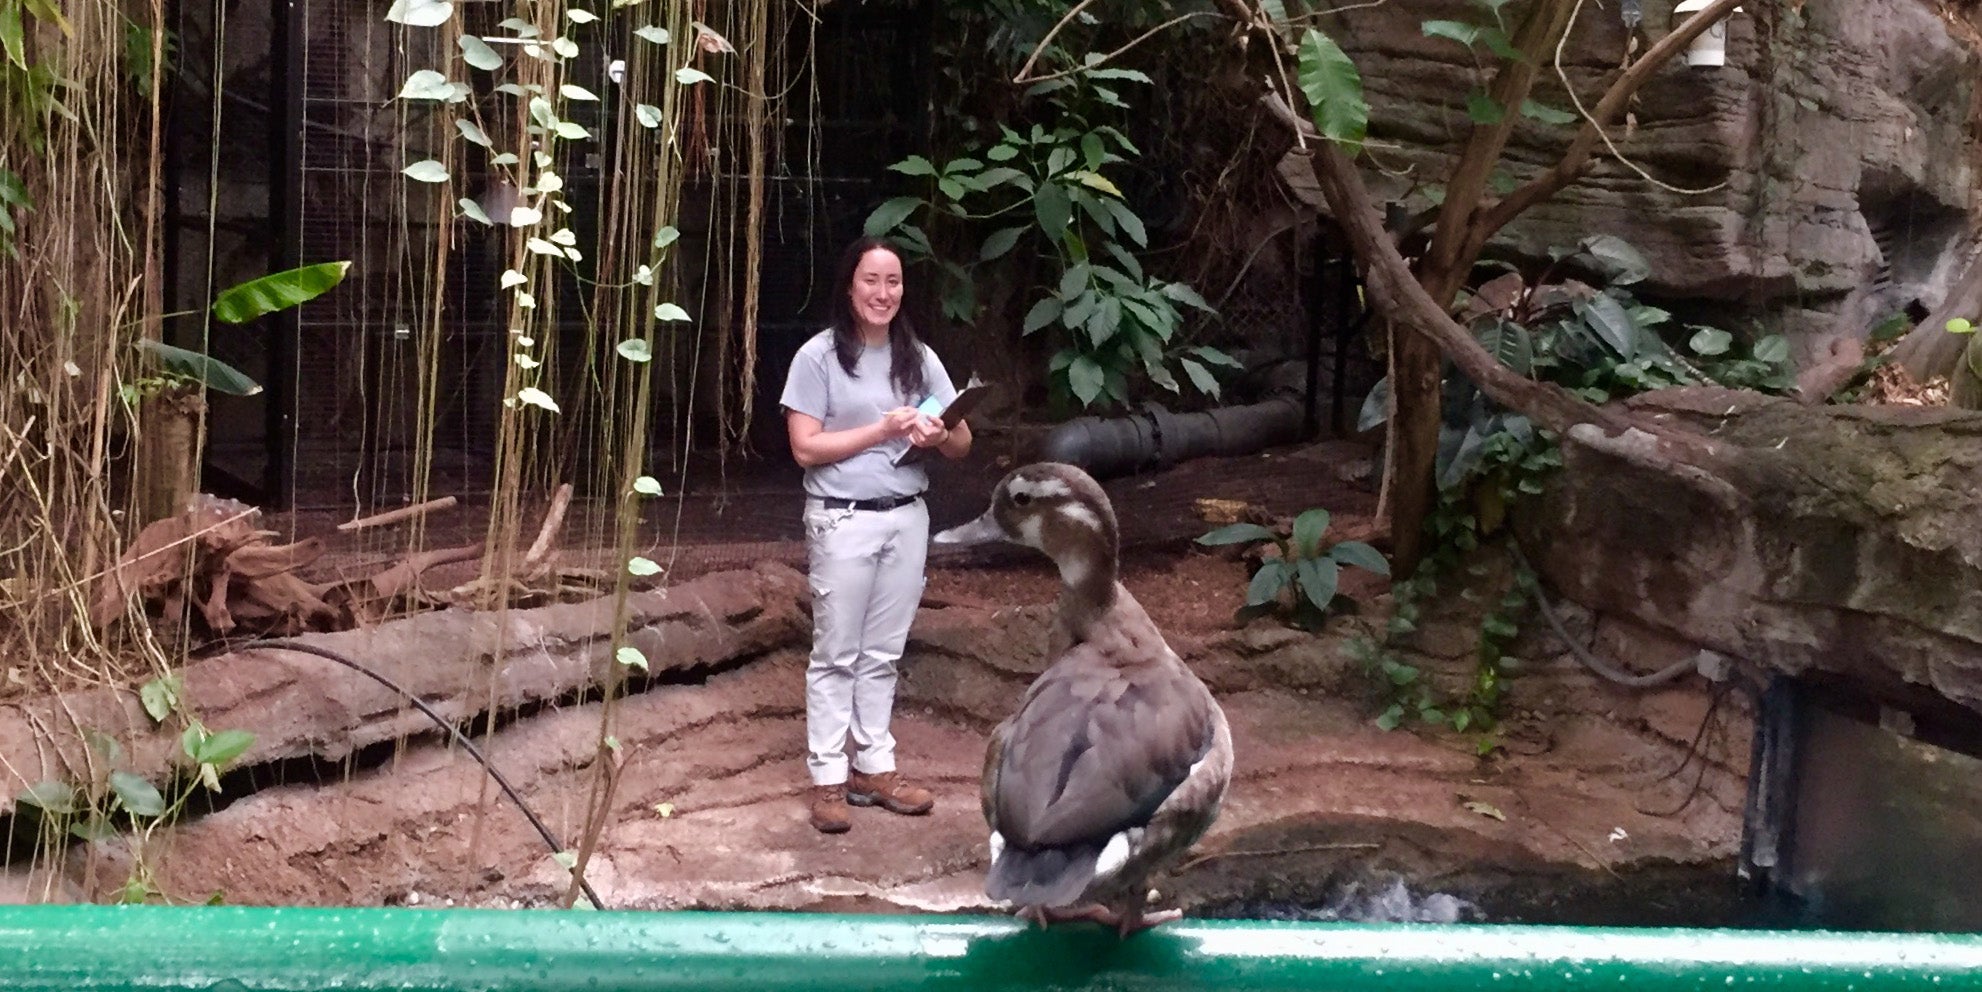 Amazonia keeper Hilary Colton recall trains the 13 free-flighted birds in the exhibit. 